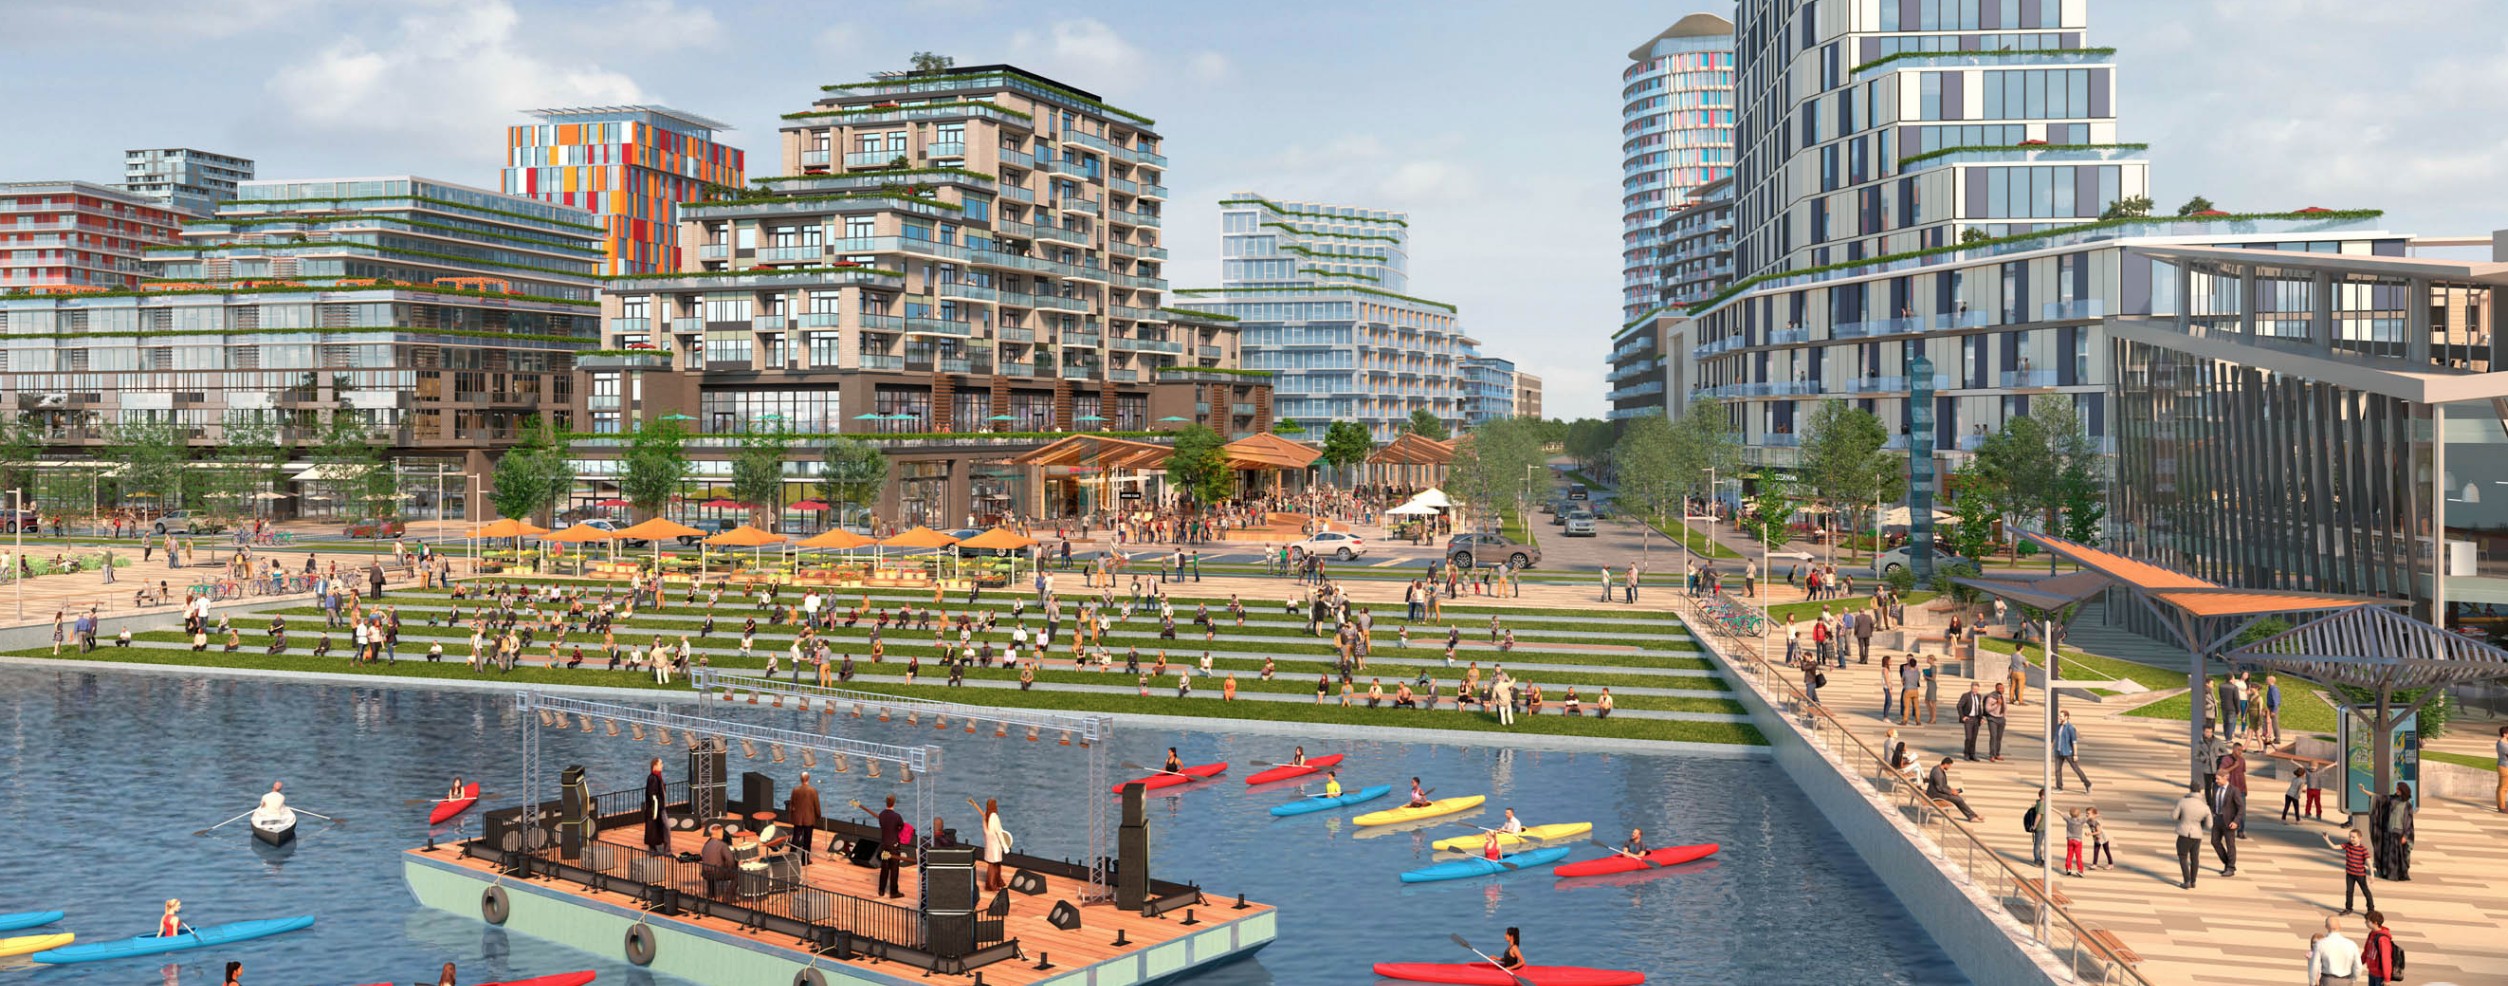 Questions remain as Lakeview Village approaches final approval